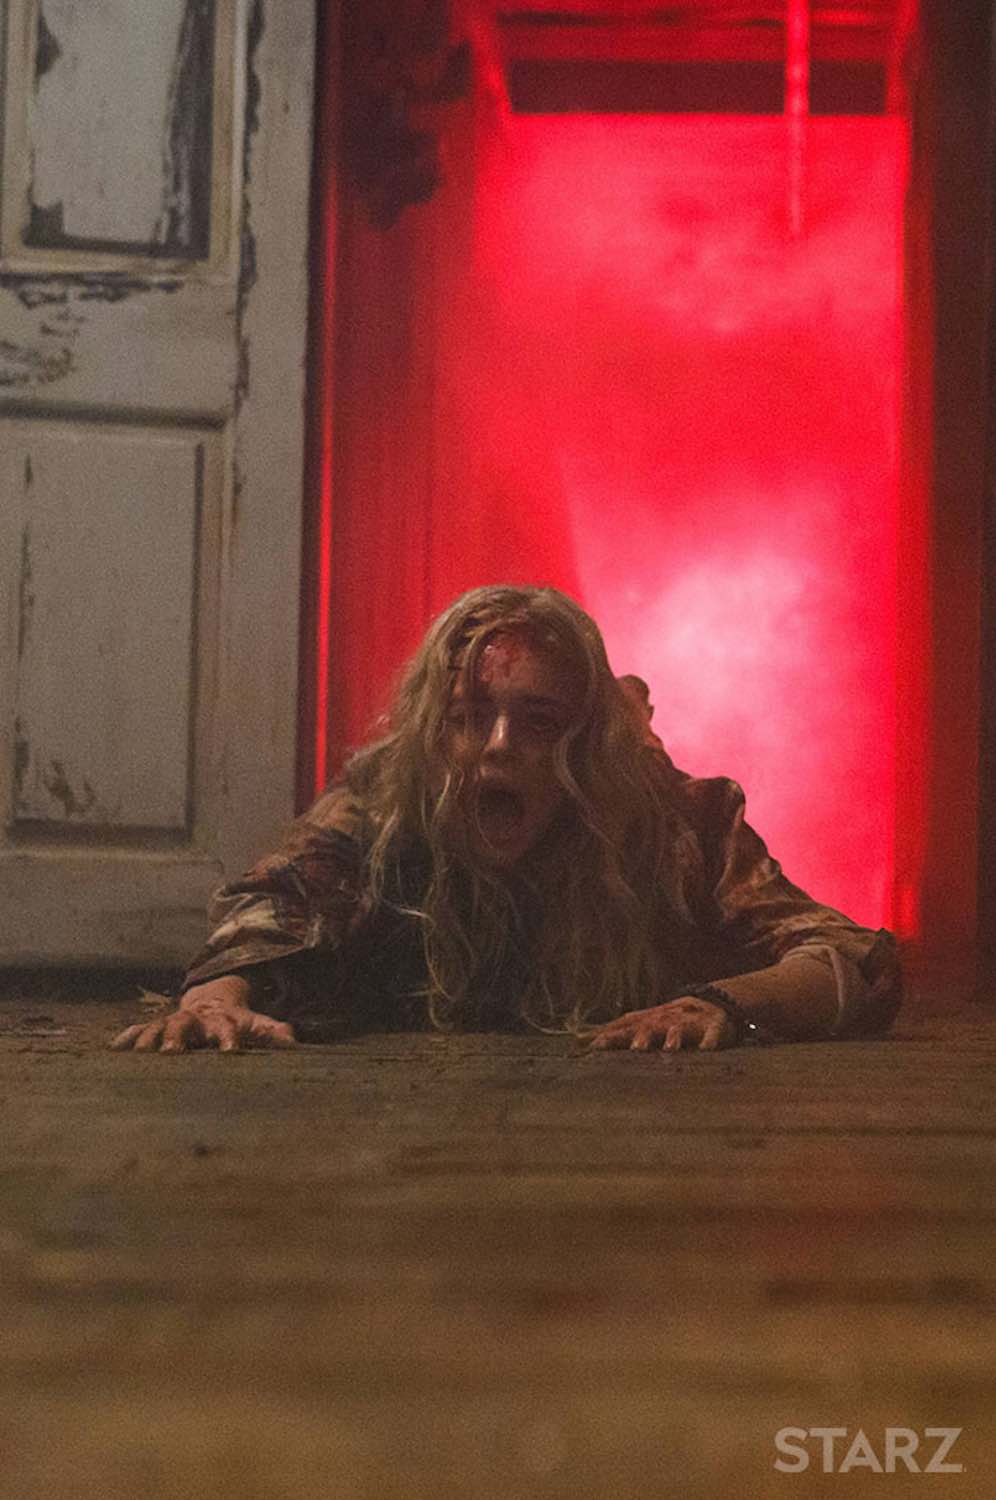 THE EVIL DEAD: COLLEGE FILMMAKERS FROM MICHIGAN STRIKE IT RICH